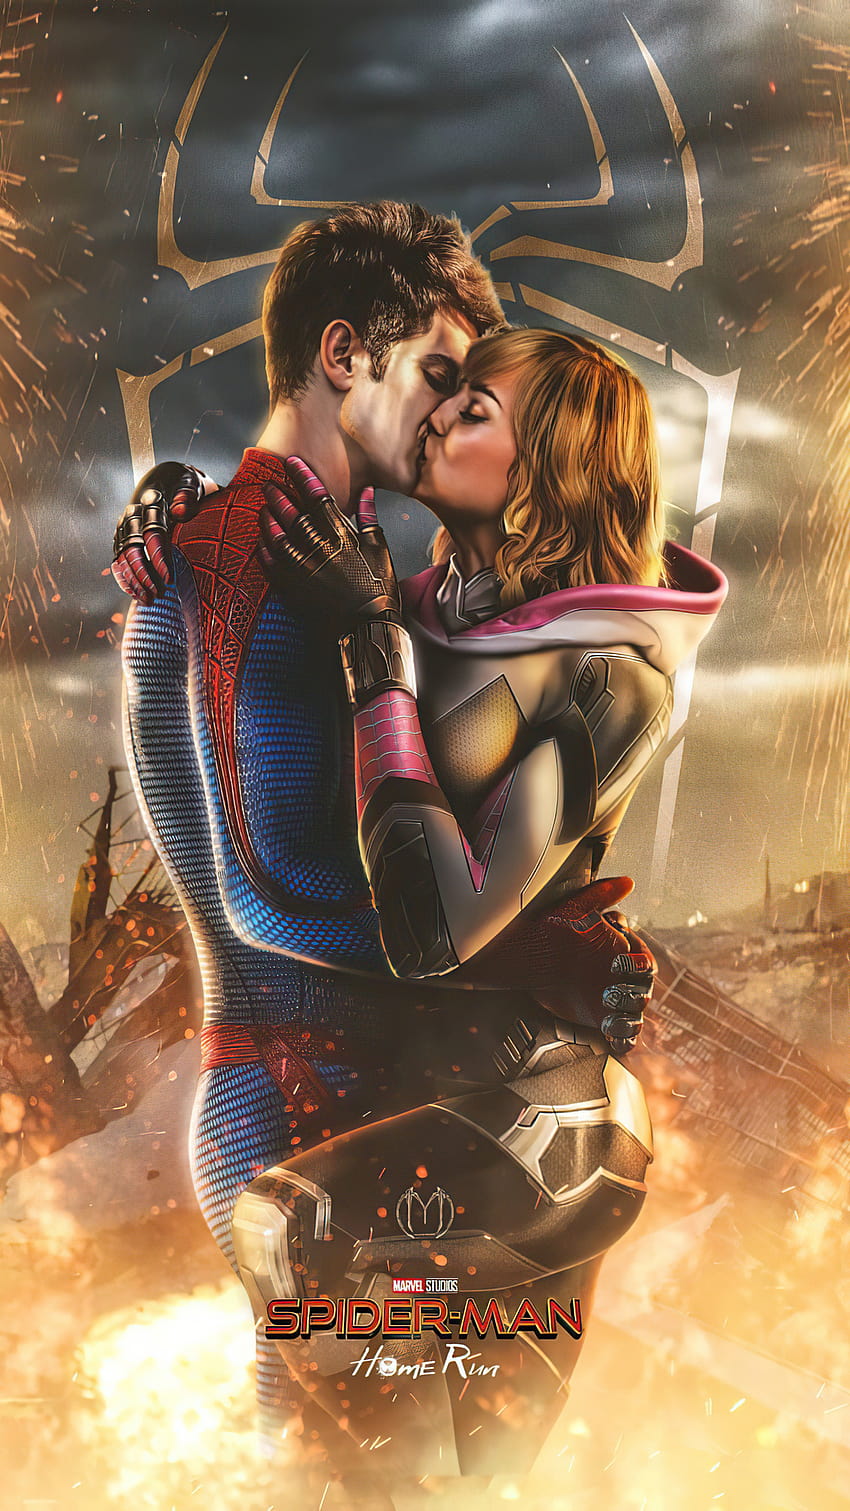 1080x1920 Spiderman And Gwen Stacy Kissing Iphone 7,6s,6 Plus, Pixel xl ,One Plus 3,3t,5 , Backgrounds, and, spider man gwen stacy HD phone wallpaper